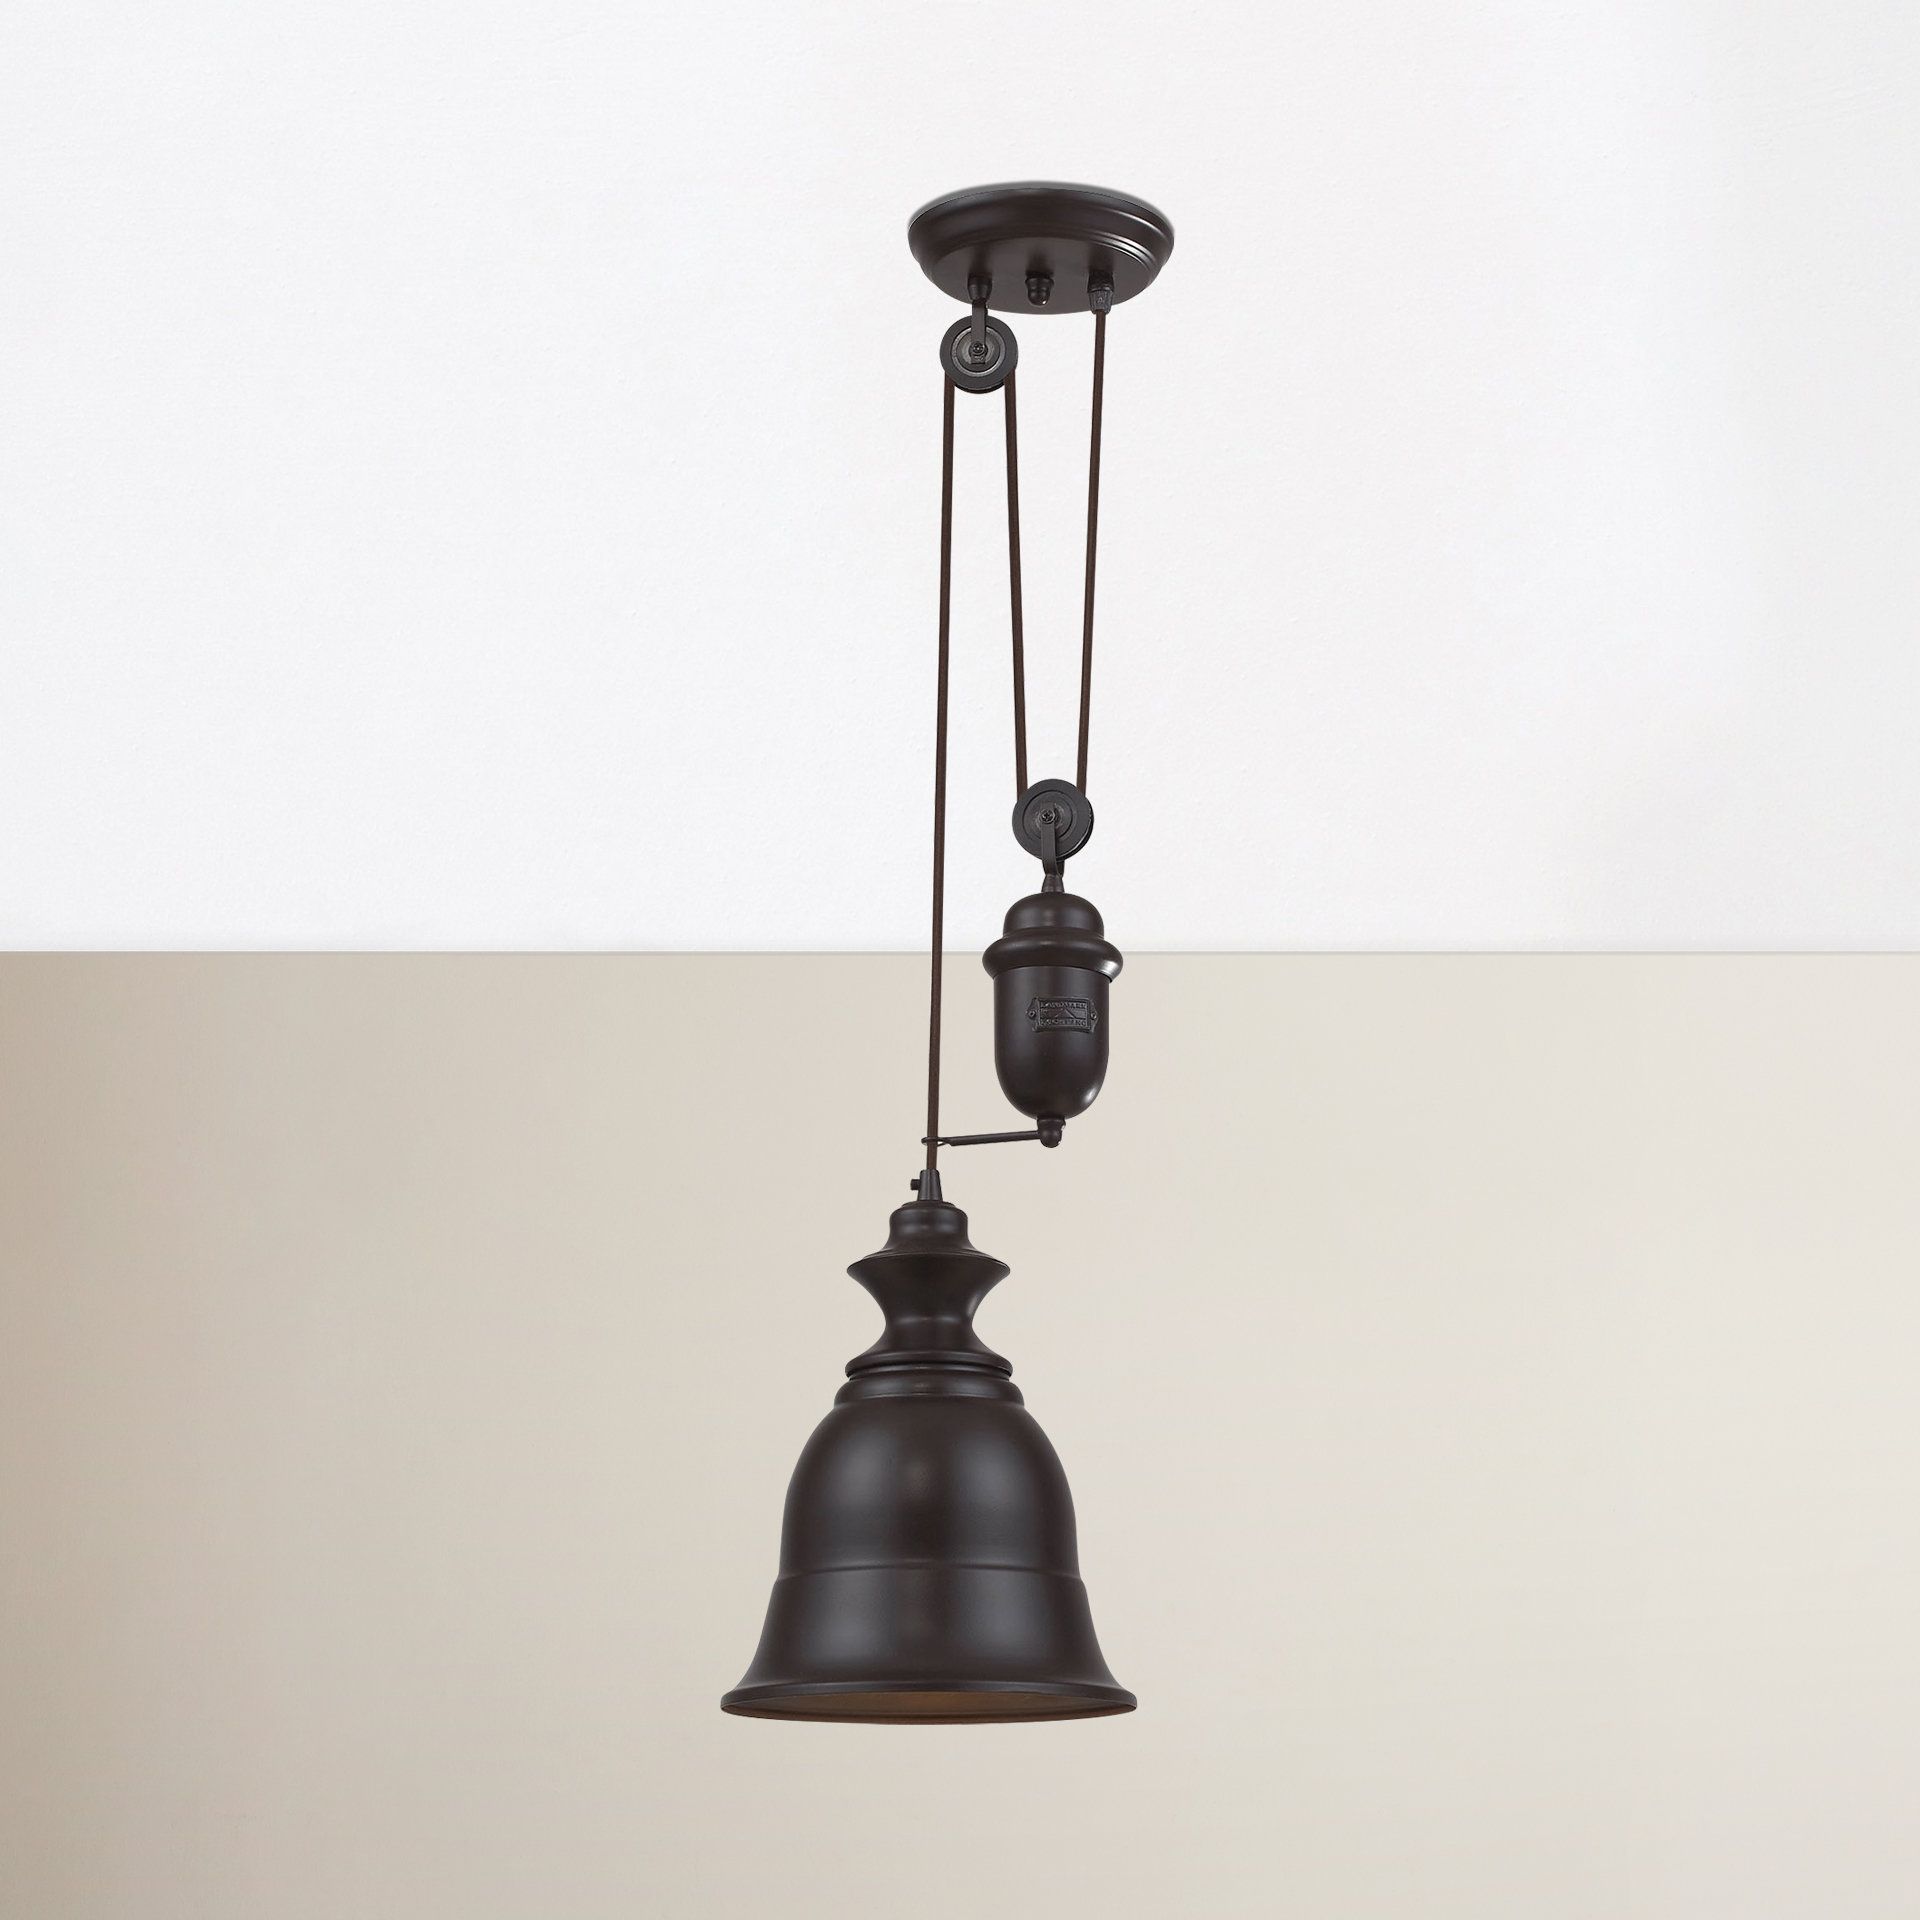 Farmhouse & Rustic Antique Nickel Pendants | Birch Lane Intended For Terry 1 Light Single Bell Pendants (View 12 of 30)